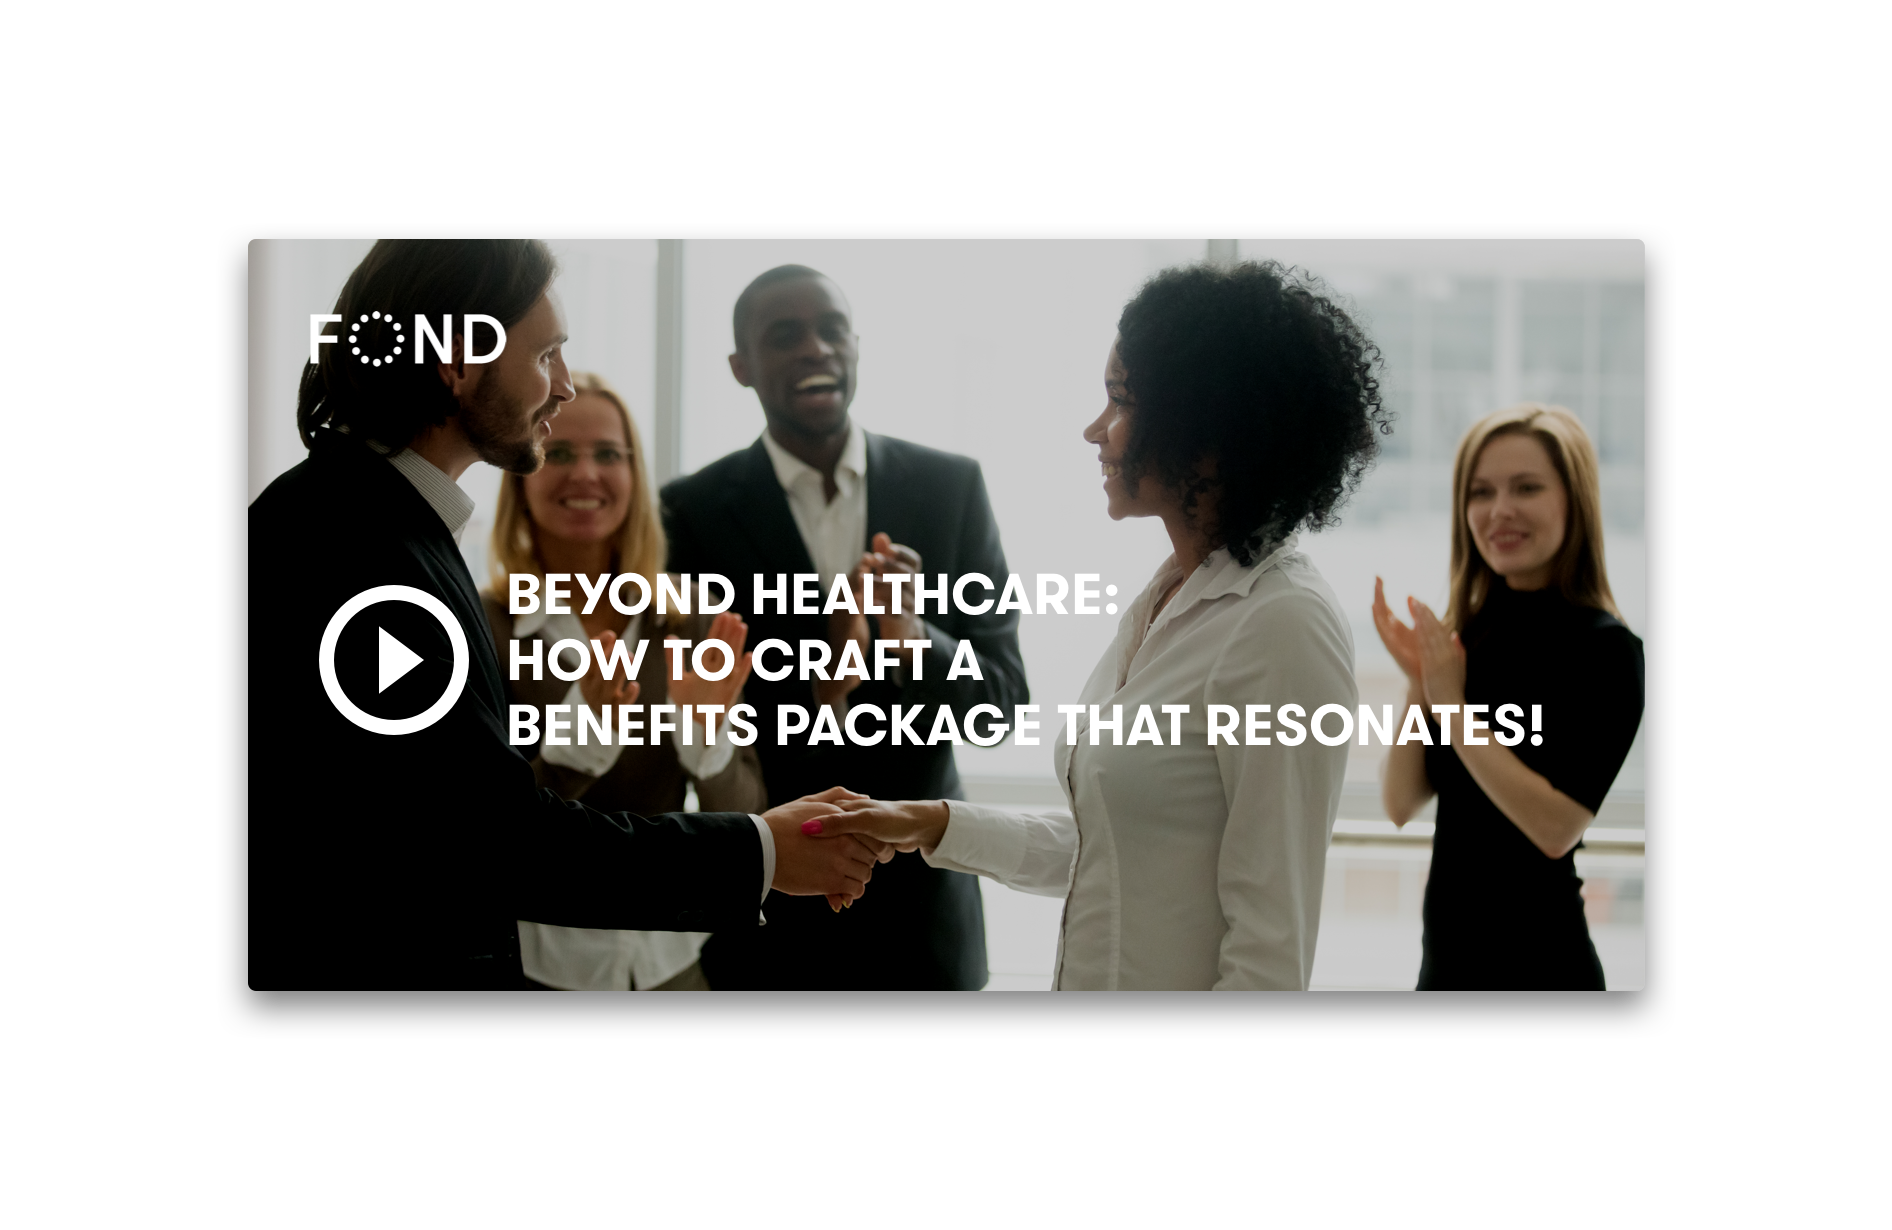 Beyond Healthcare: How to Craft a Benefits Package that Resonates!